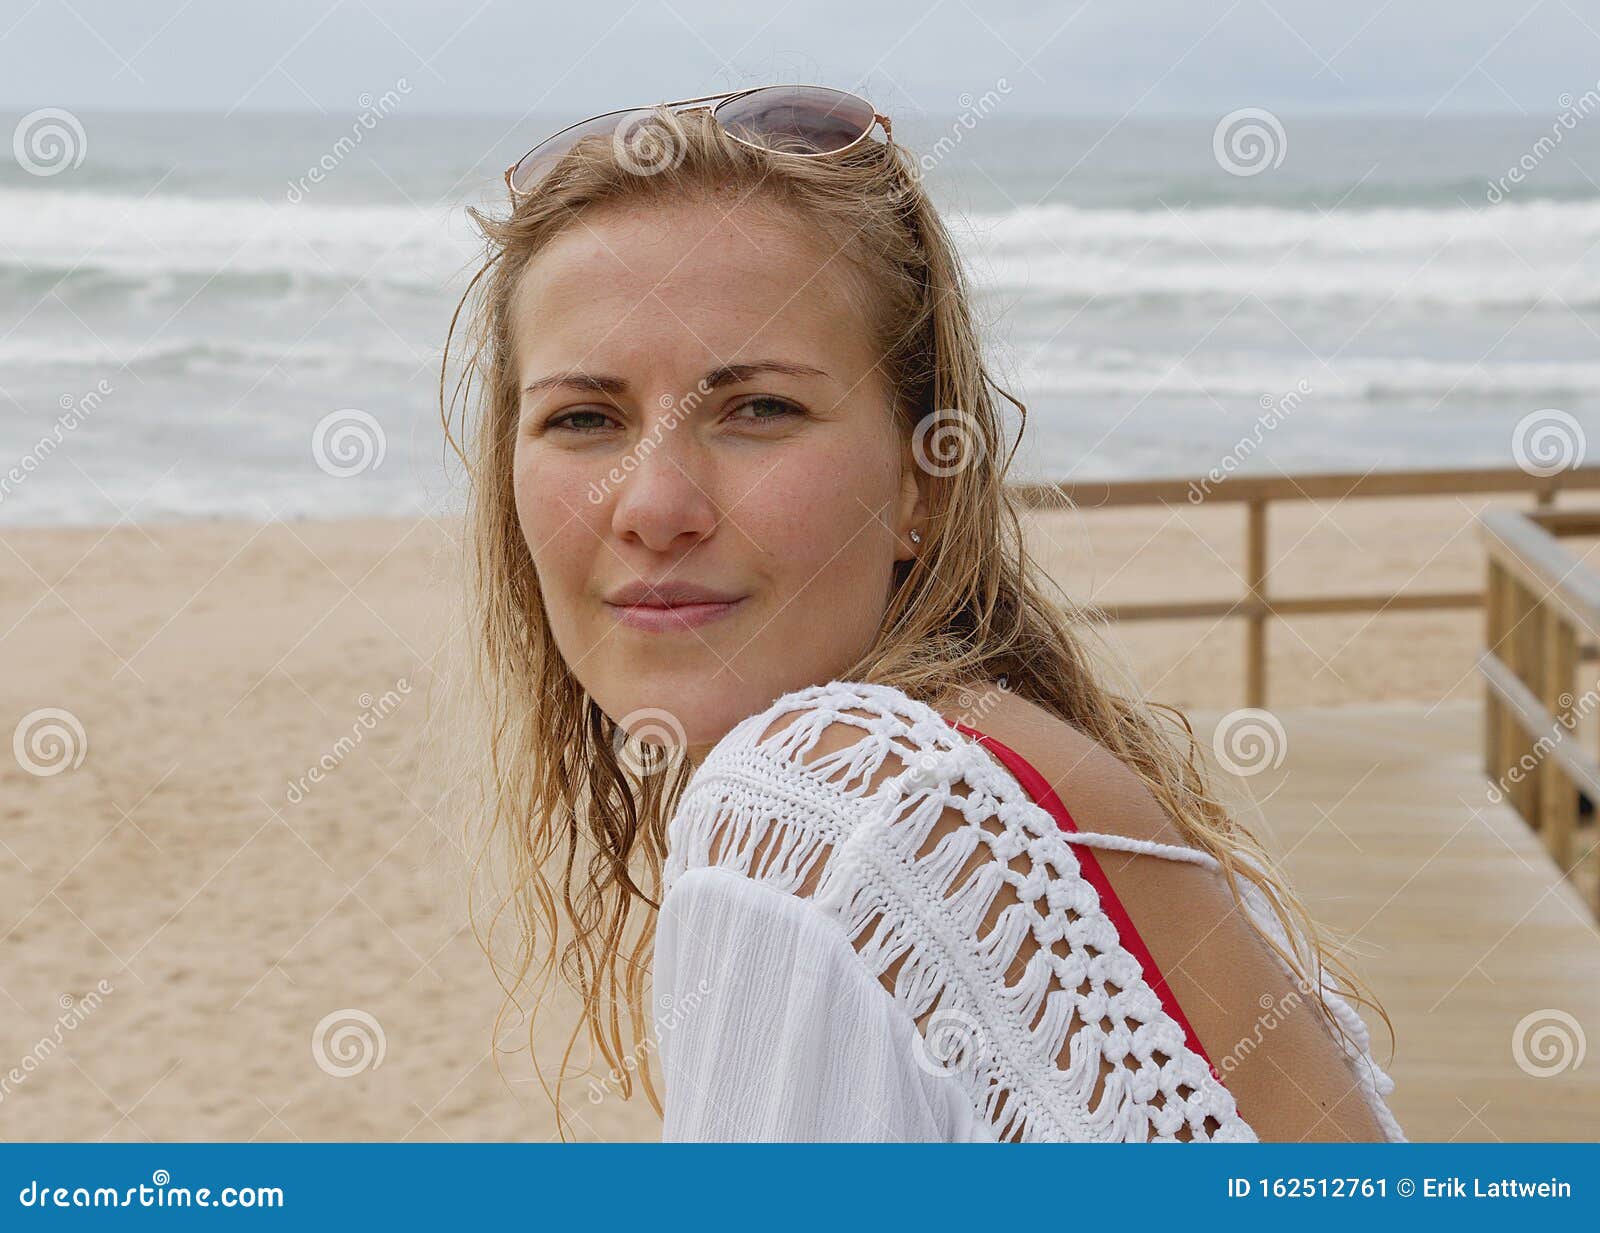 Girl Poses for the Camera - Happy Girl on Summer Vacation at the Beach ...